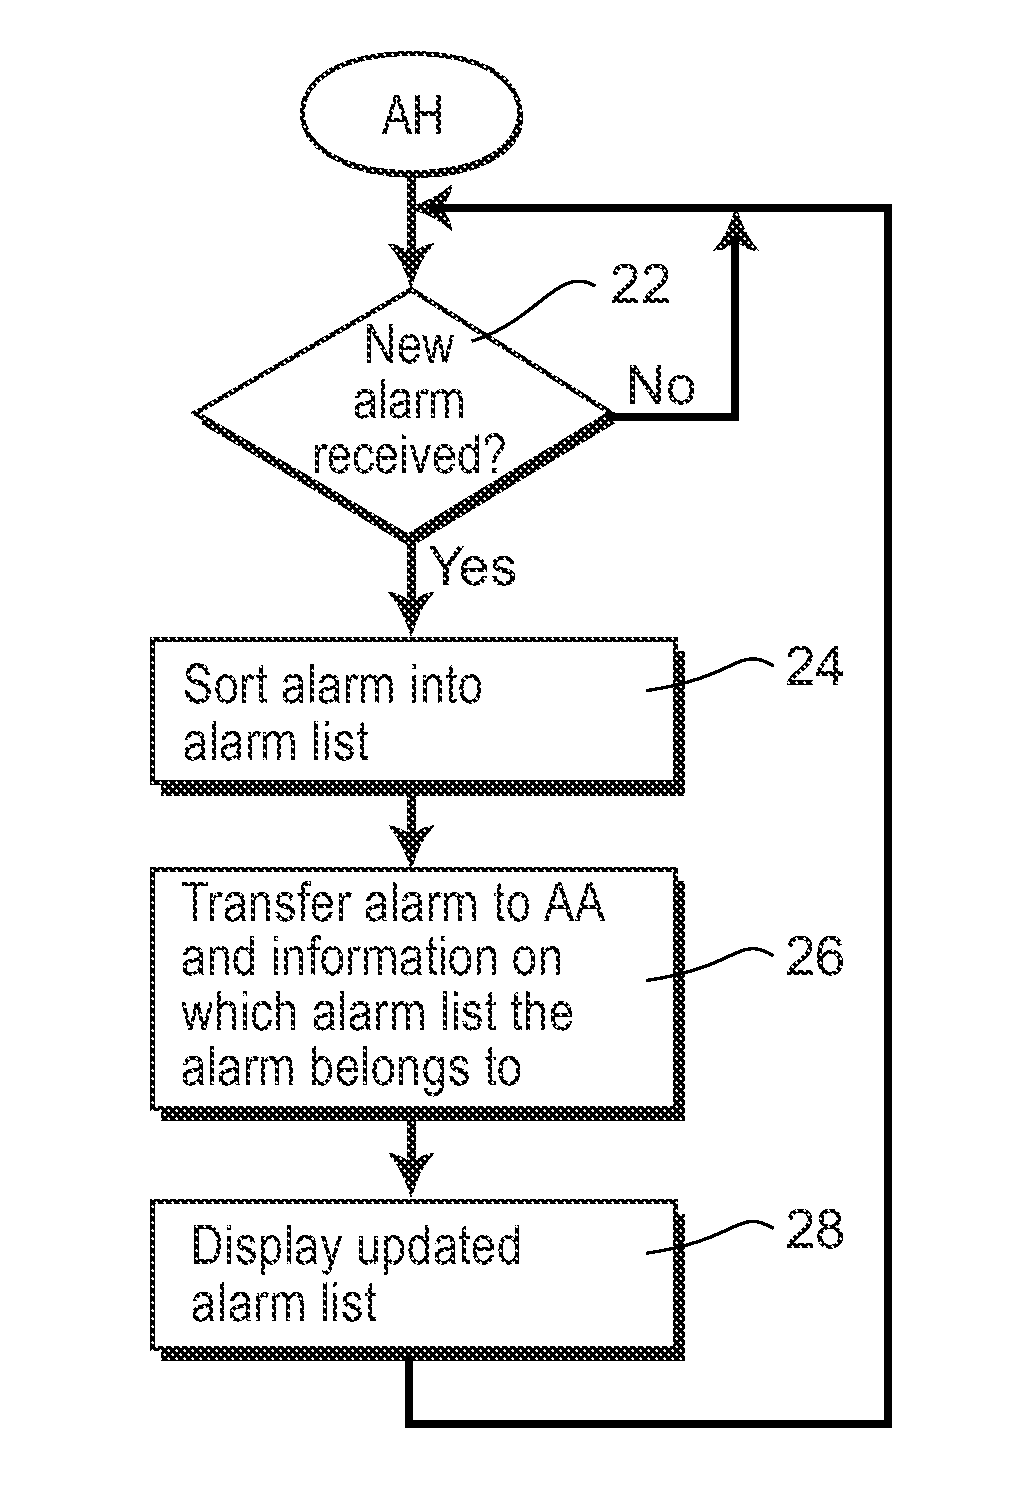 Alarm Analysis System And A Method For Providing Statistics On Alarms From A Process Control System